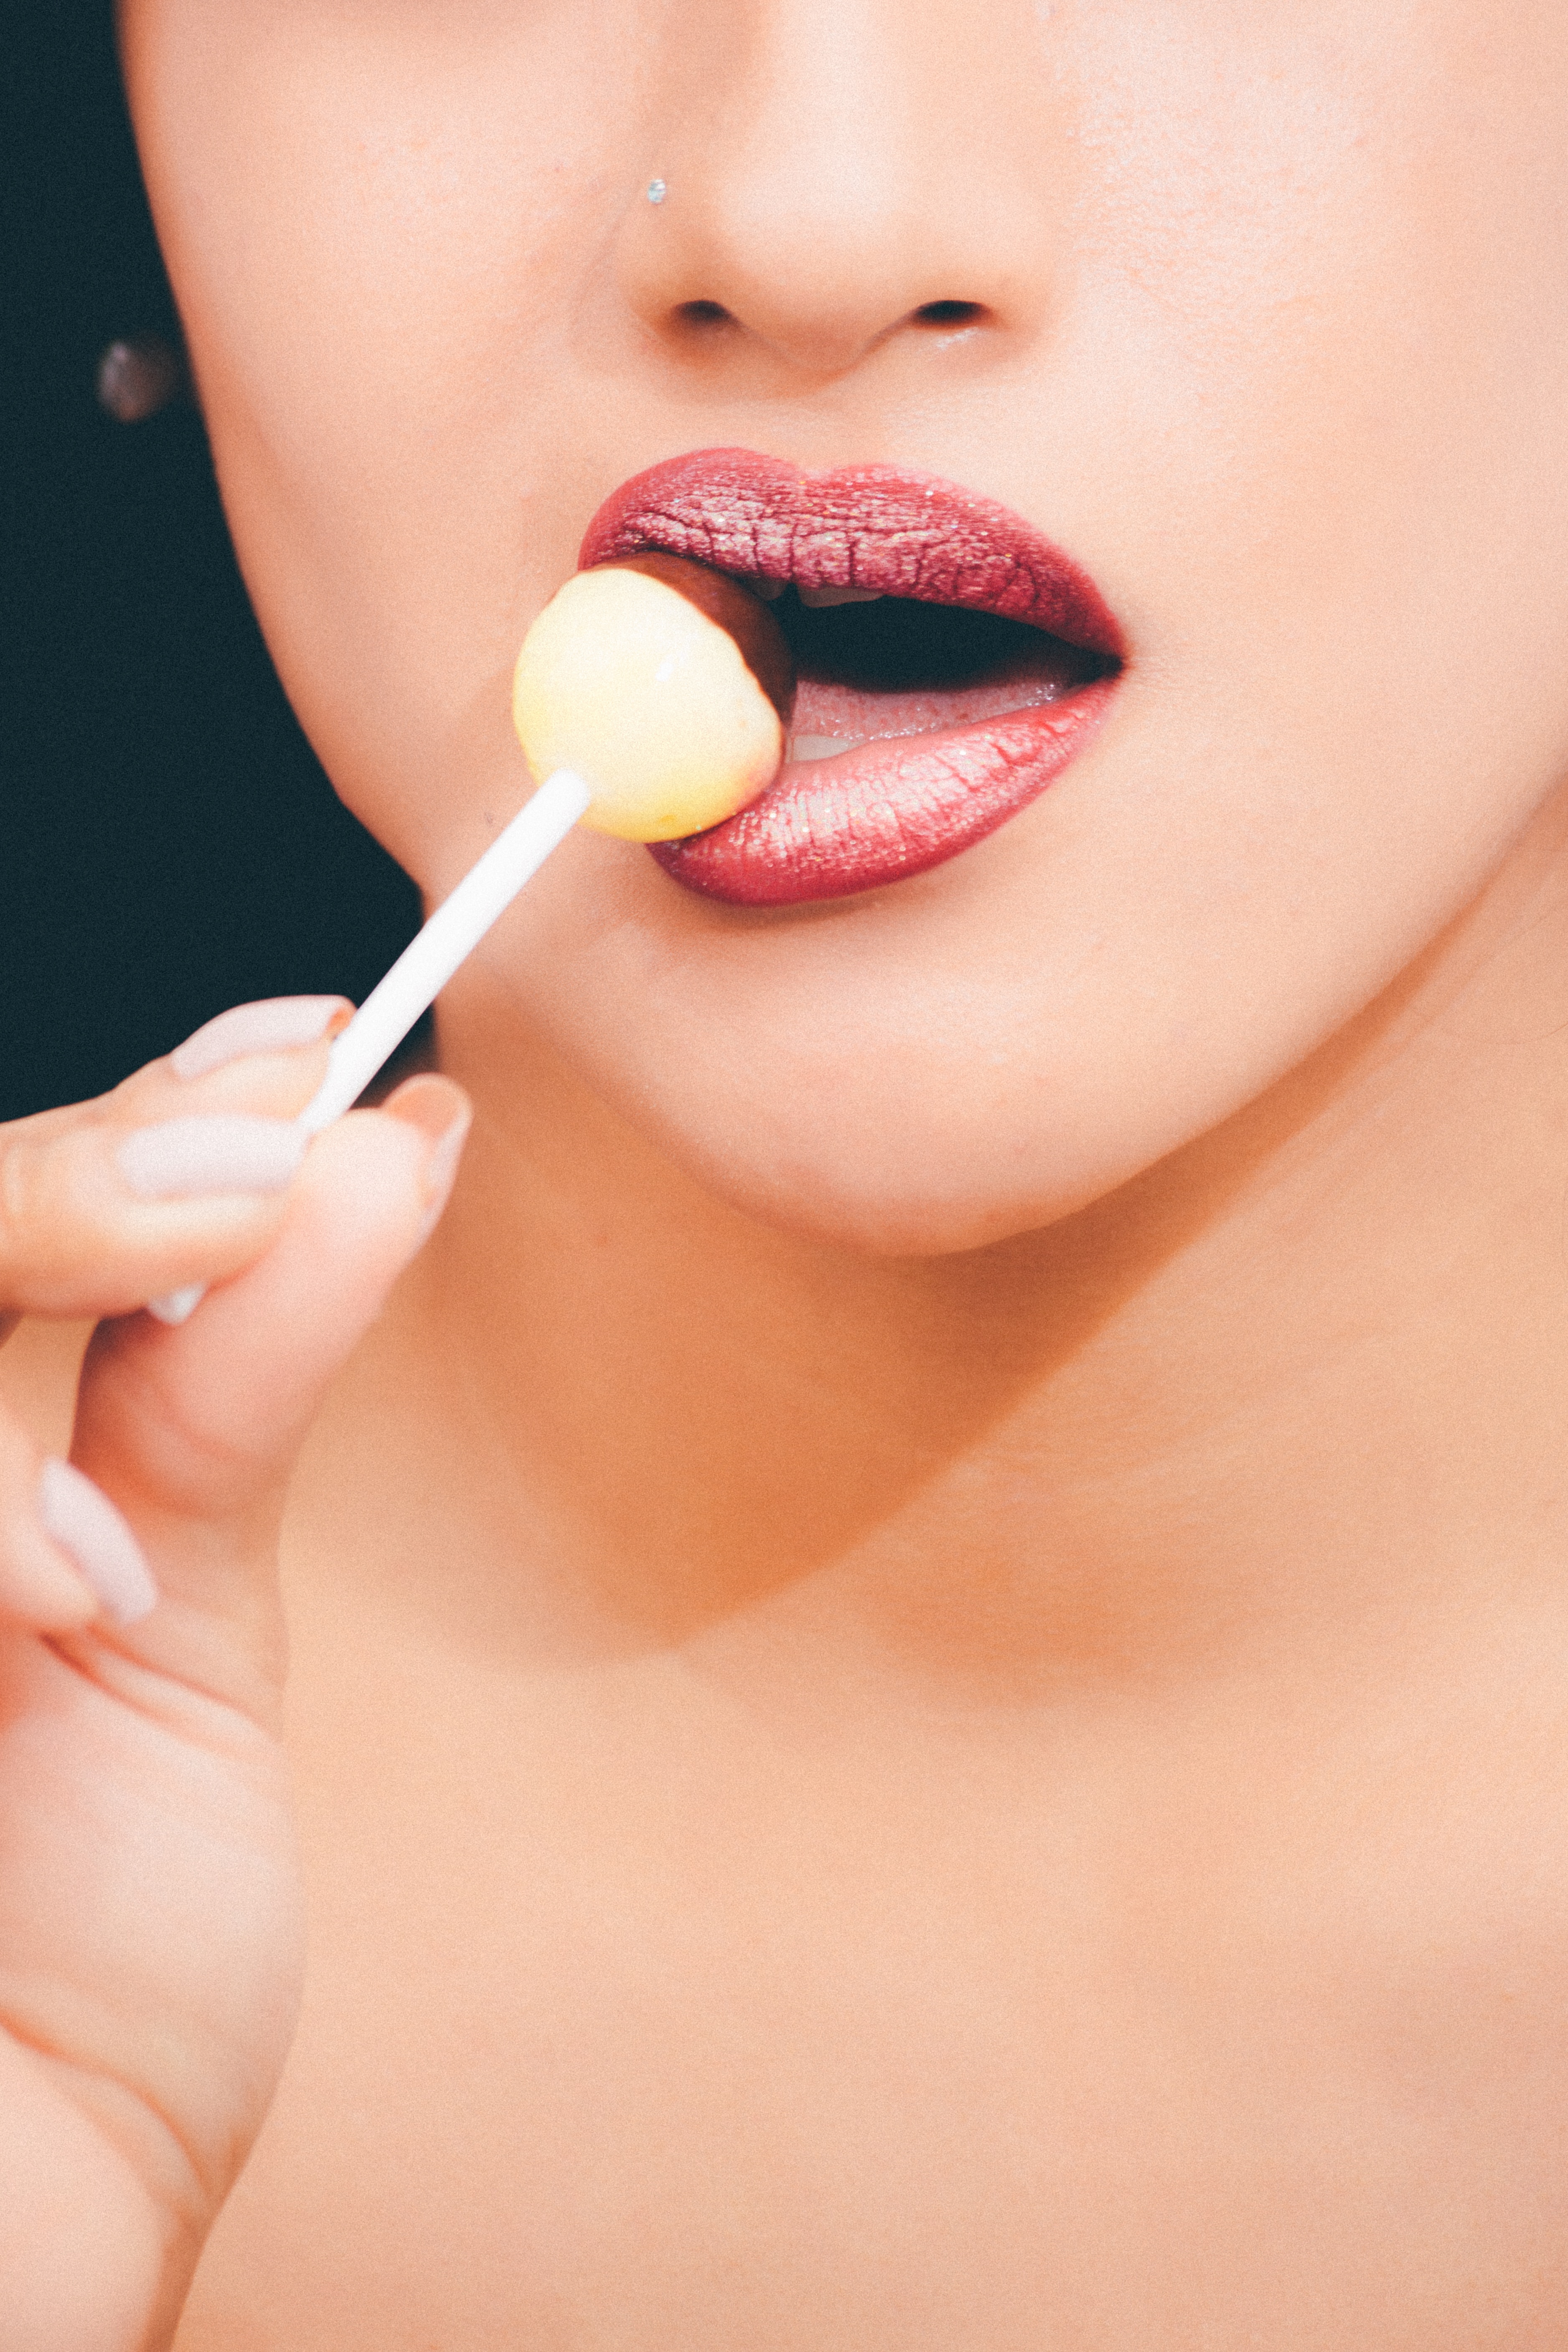 Woman with red lipstick licking a lollipop photo